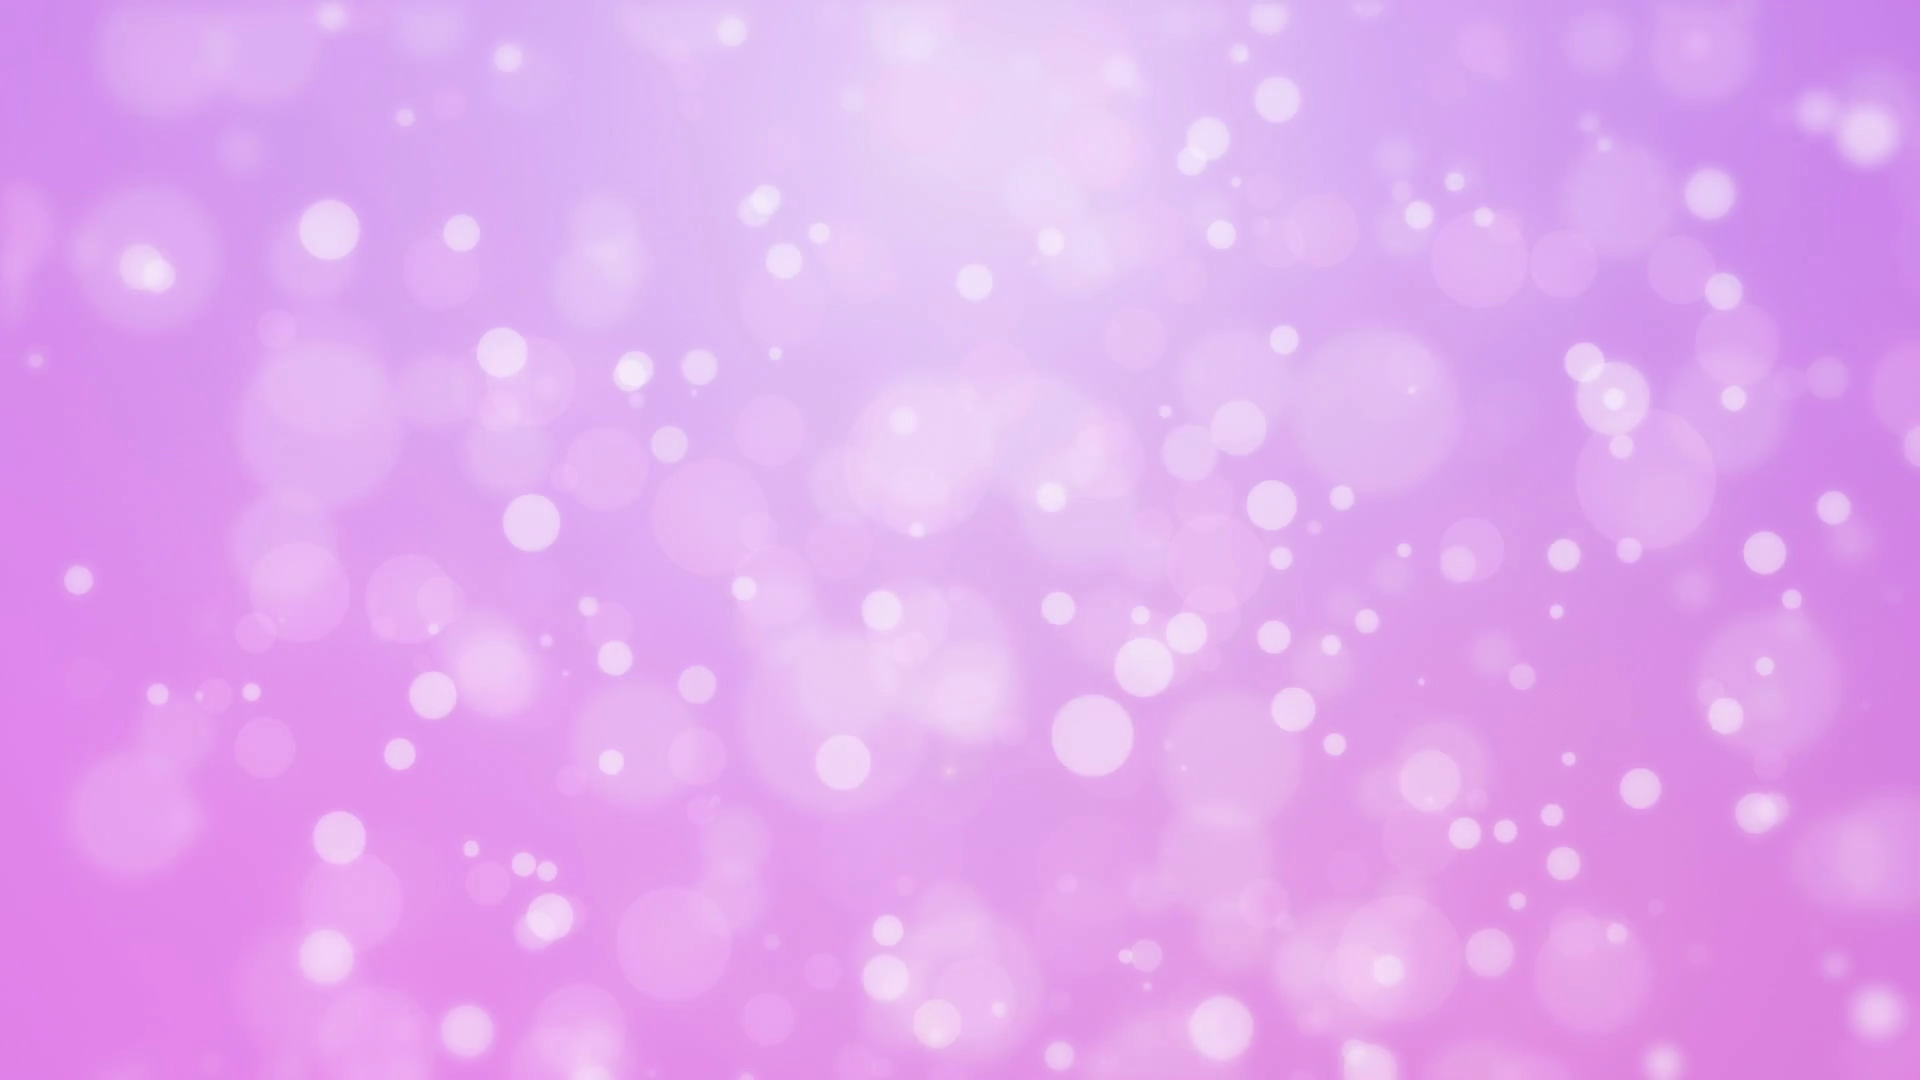 Sweet romantic purple pink gradient animated background with ...